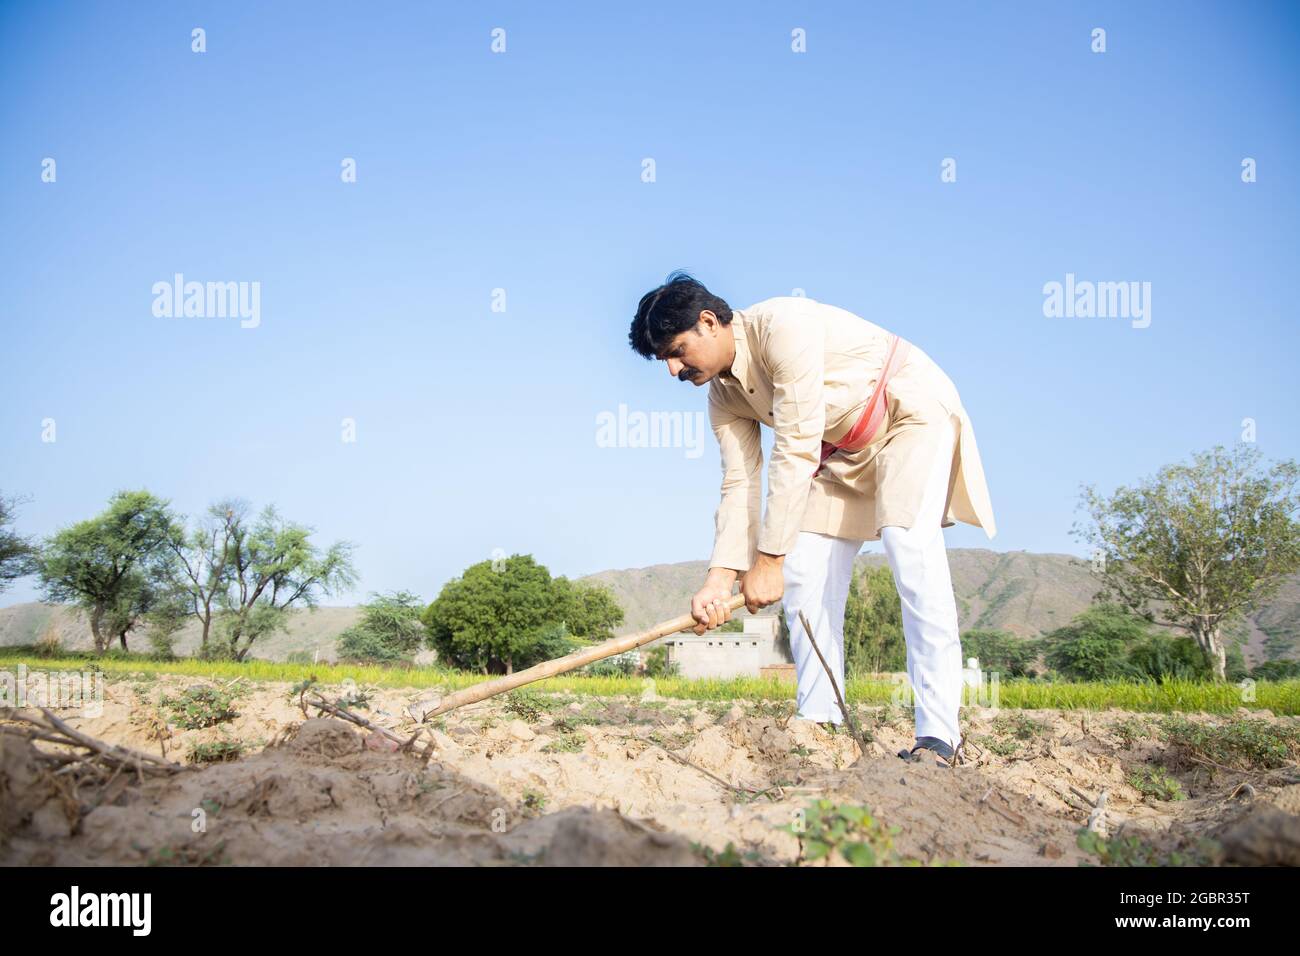 Indian farmer digging farmland, man labor working in agriculture field with farming tool. hardworking male, clear blue sky, copy space, low angle, Stock Photo